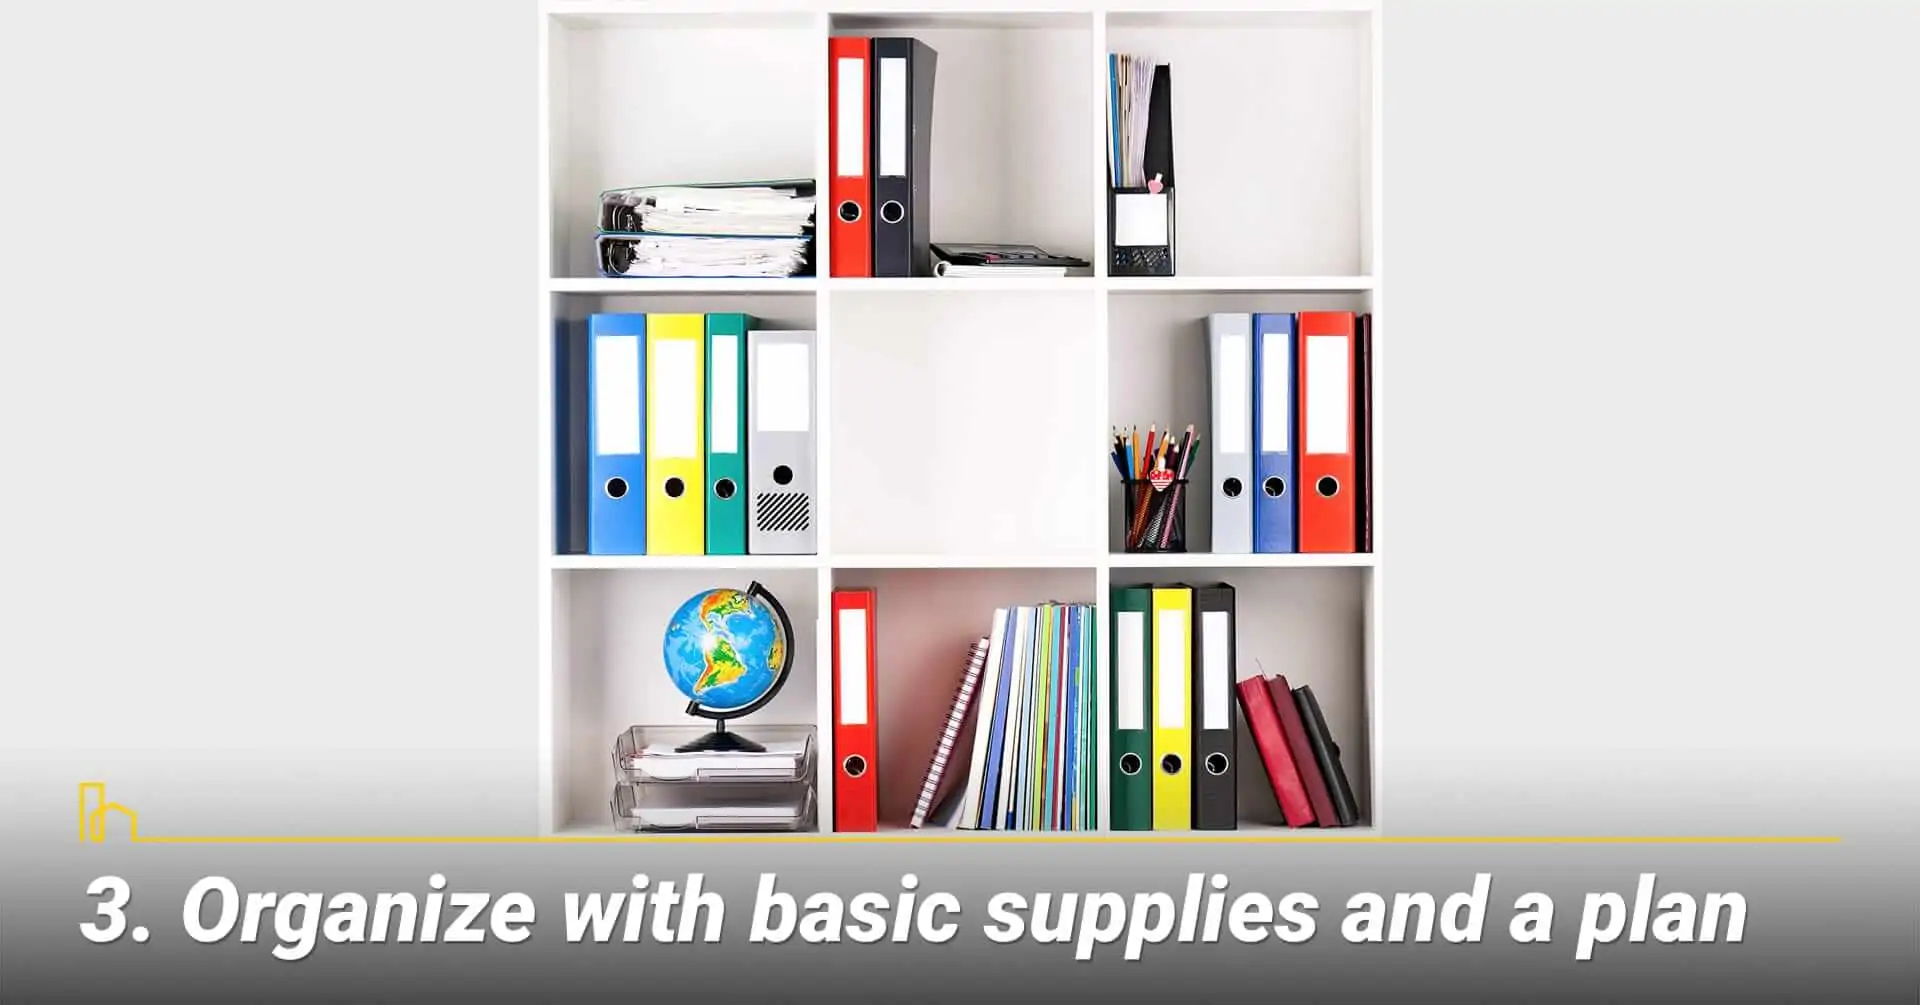 Organize with basic supplies and a plan, organize your house